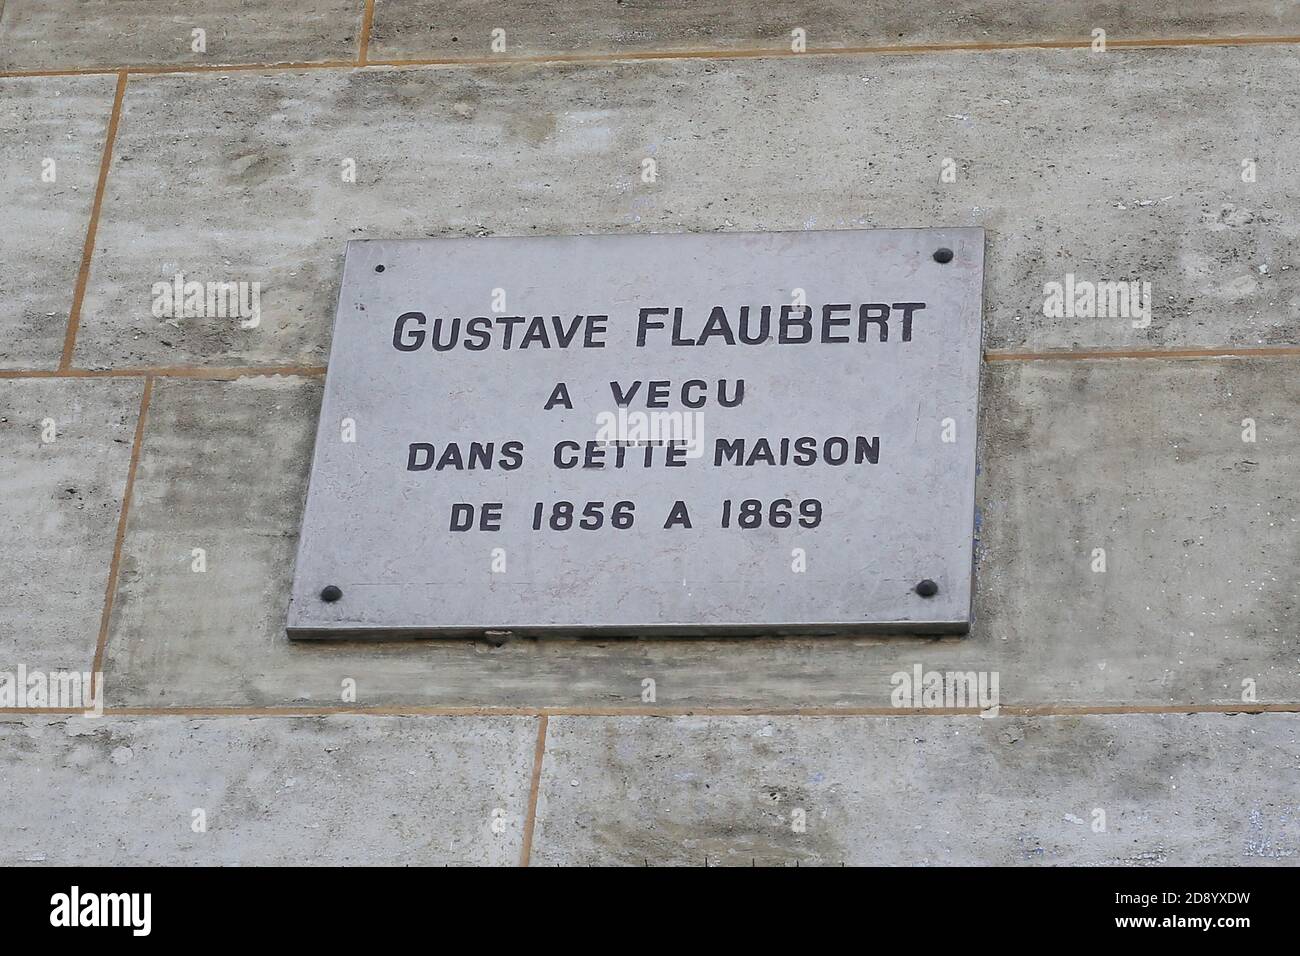 PARIS, FRANCE - May 20, 2018: The French writer Gustave Flaubert lived in this house from 1856 to 1869Paris, 42 boulevard du temple, Gustave Flaubert Stock Photo